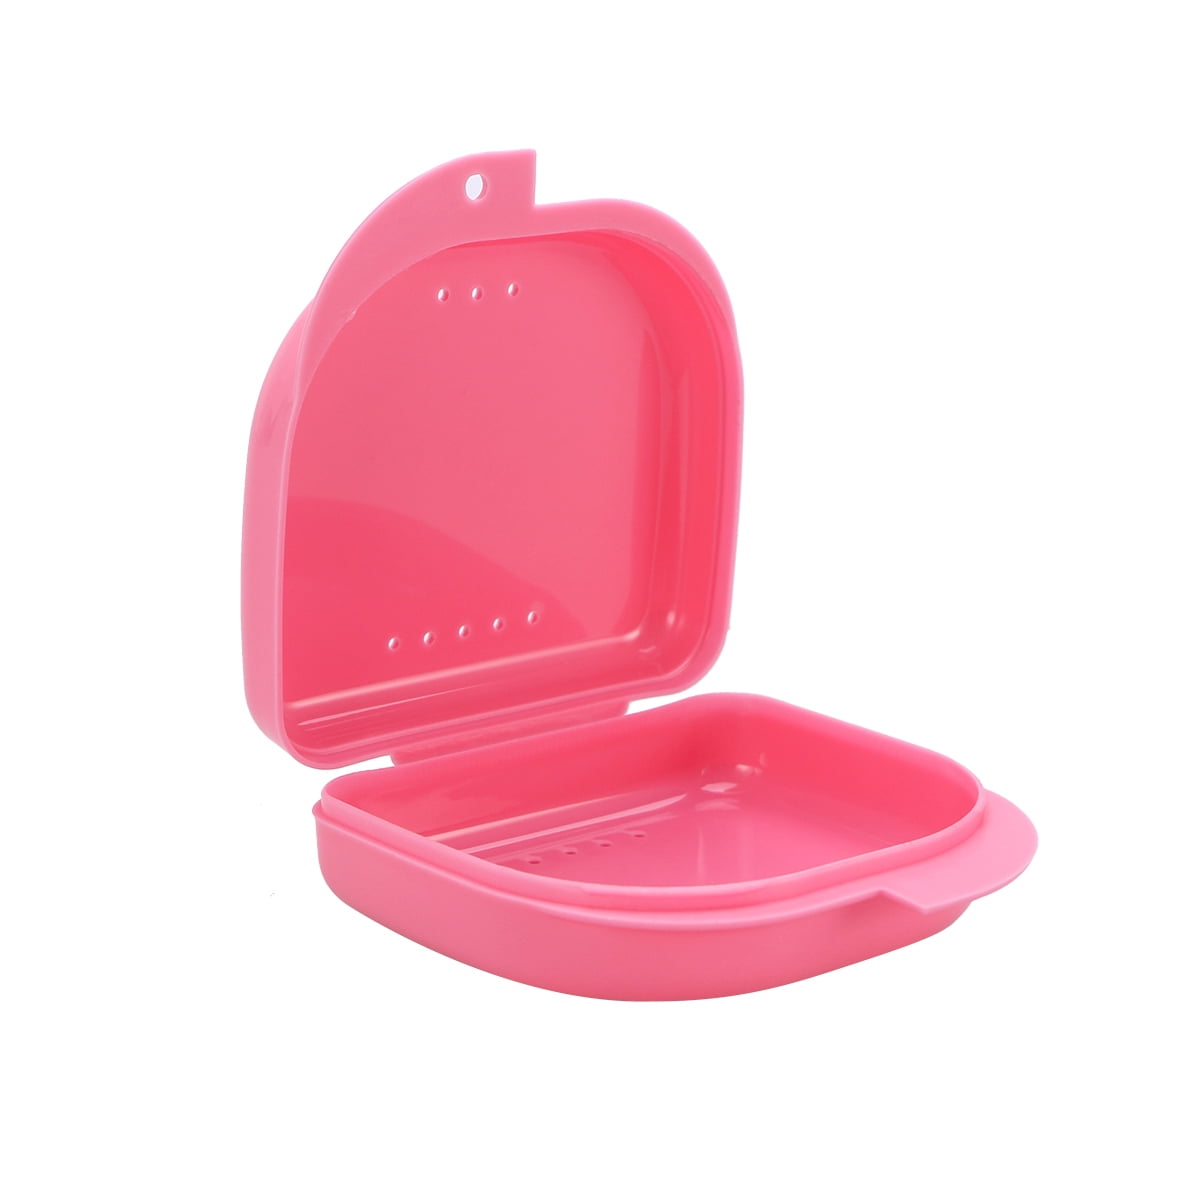 Retainer Case With Vent Holes and Hinged Lid Snaps Mouth Guard